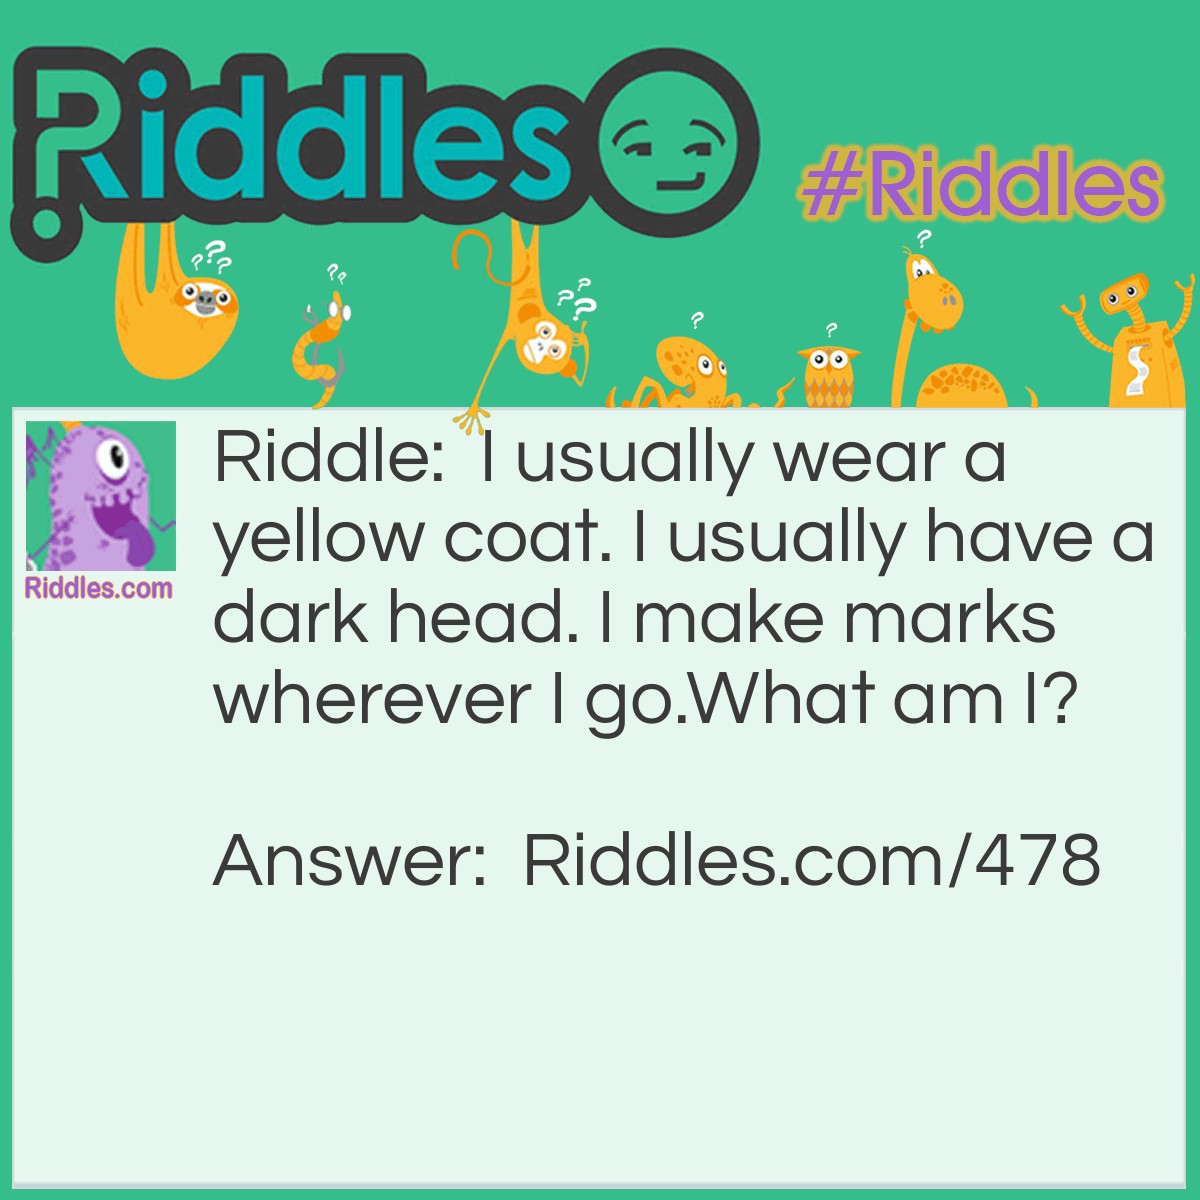 Riddle: I usually wear a yellow coat. I usually have a dark head. I make marks wherever I go.
What am I? Answer: A pencil.